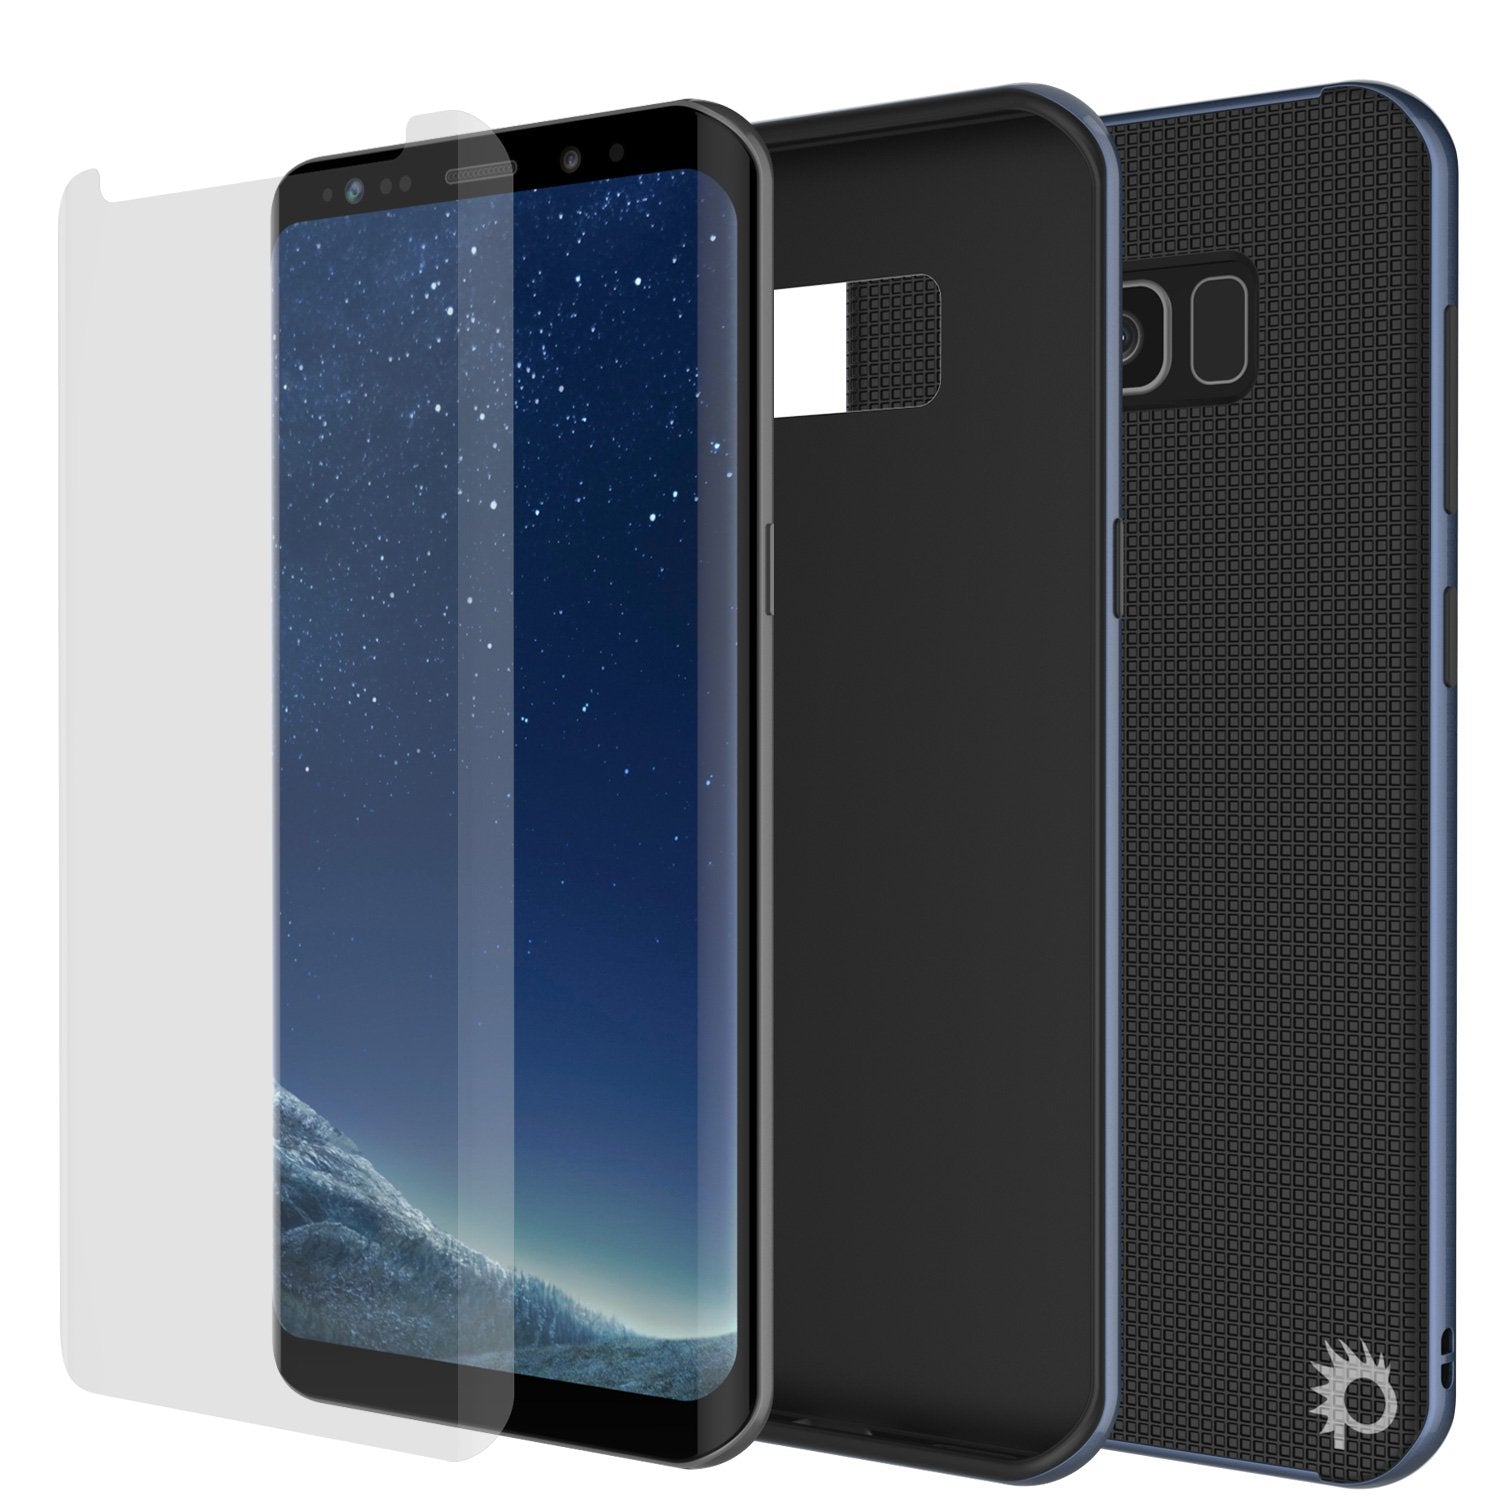 Galaxy S8 PLUS Case, PunkCase Stealth Navy Blue Series Hybrid 3-Piece Shockproof Dual Layer Cover